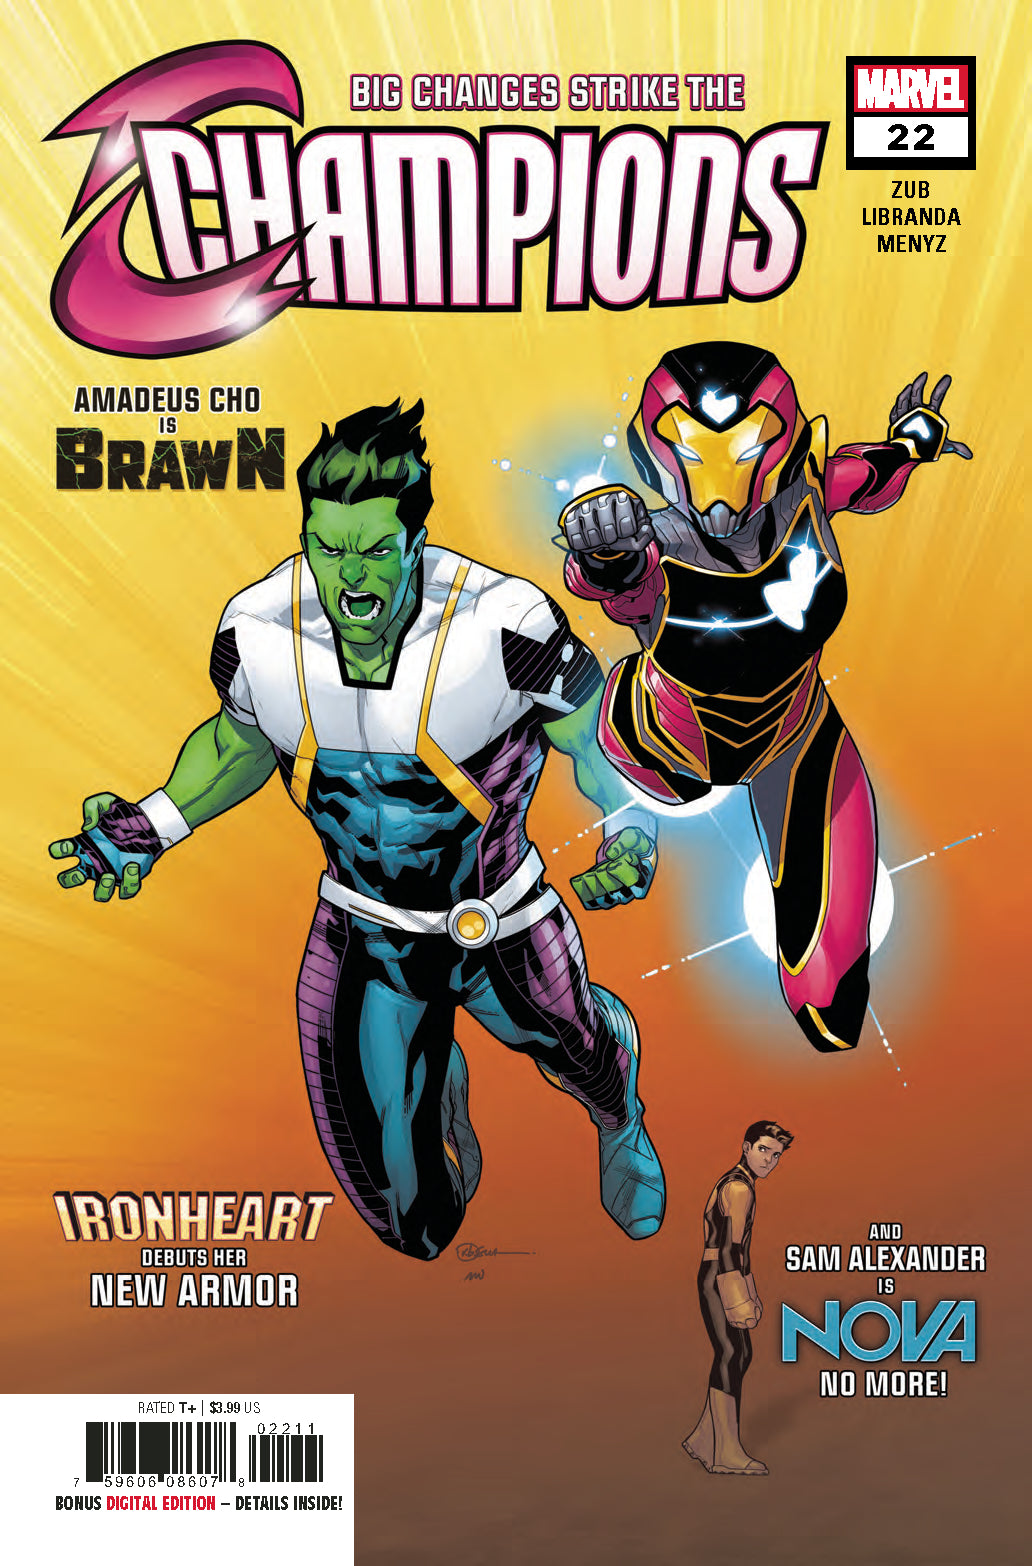 CHAMPIONS #22 COVER